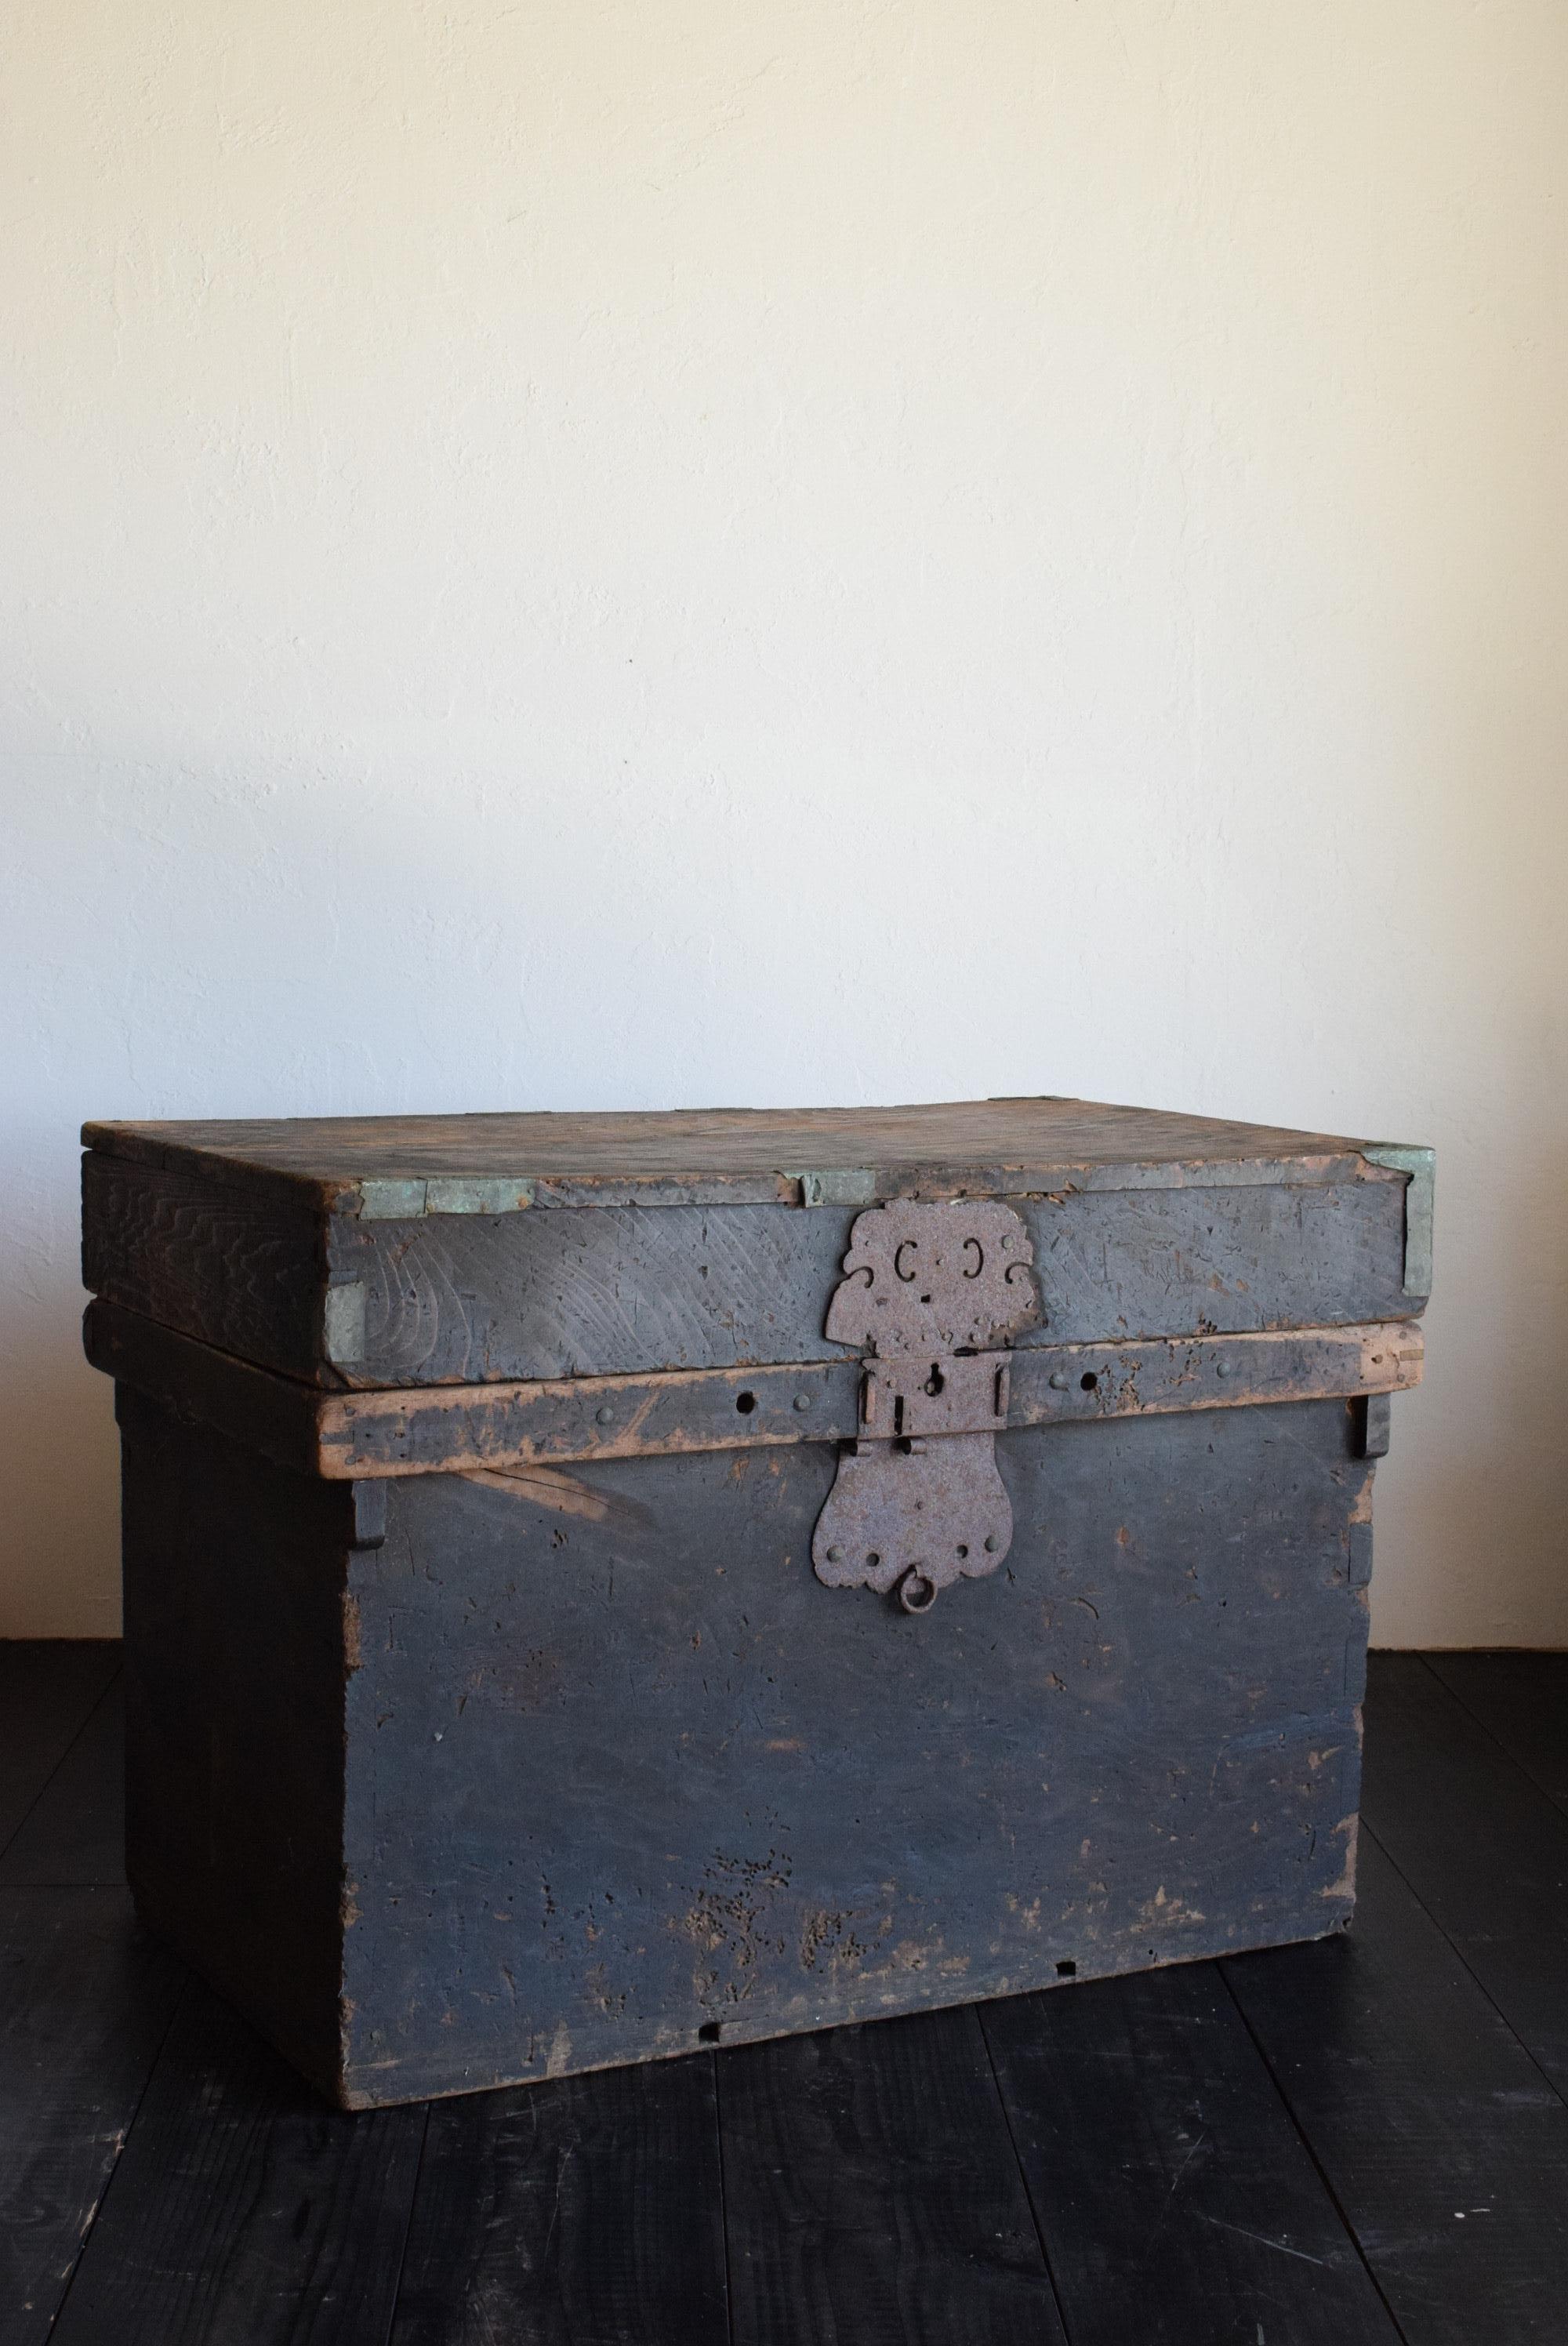 This is an old Japanese black wooden box. It is from the Meiji period (1860s-1900s). The material is cedar. This is black and beautiful. After many years of use, it has become a very deep color. I have collected many wooden boxes in the past, but